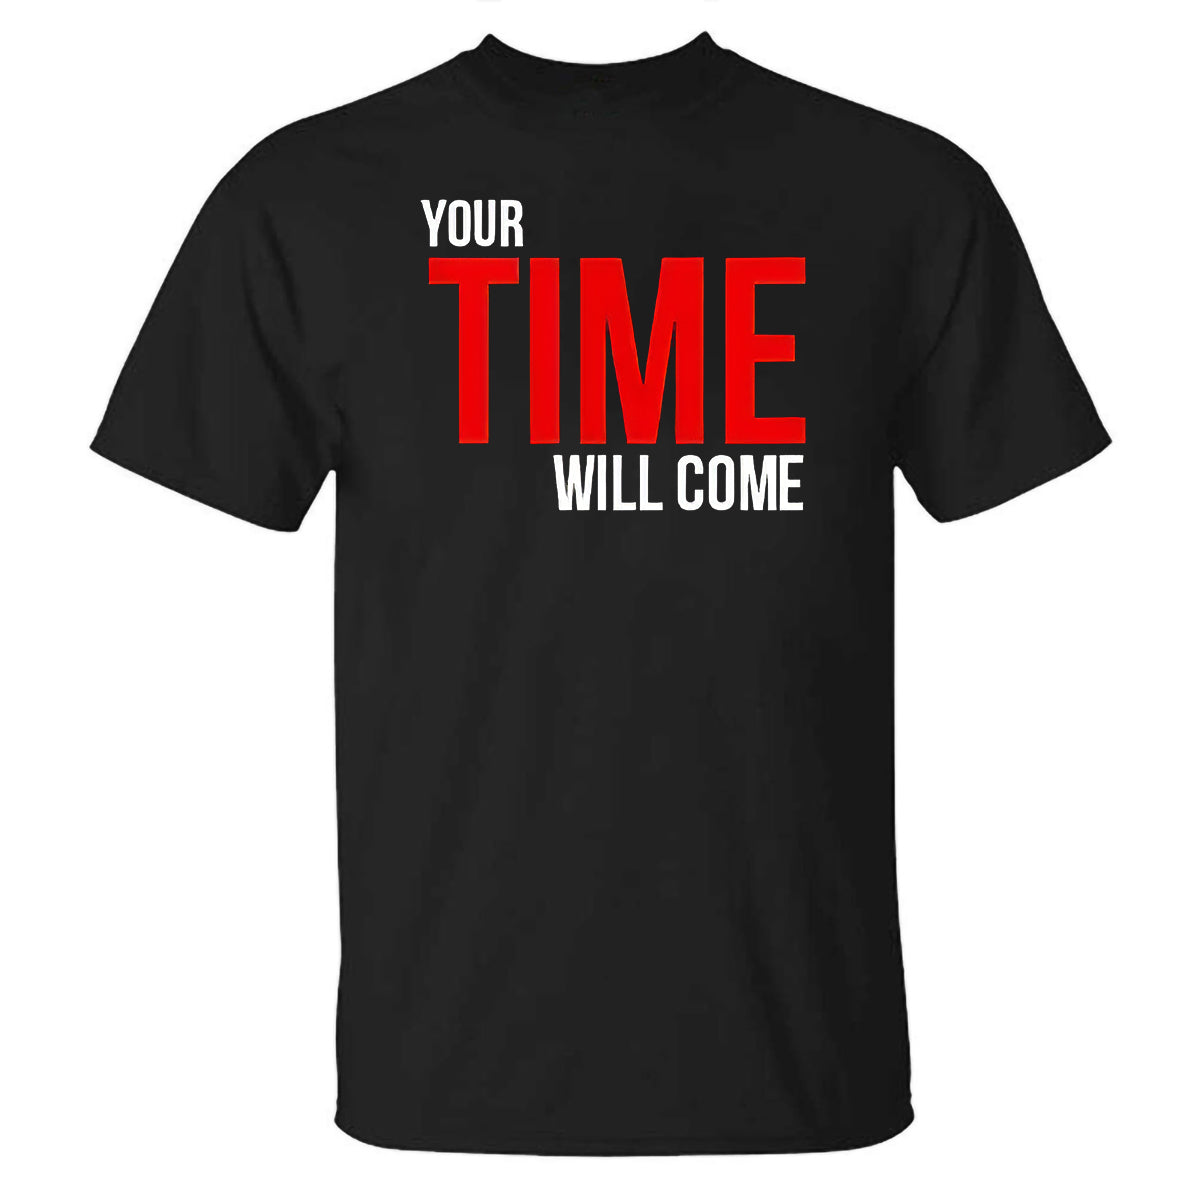 Your Time Will Come Printed T-shirt